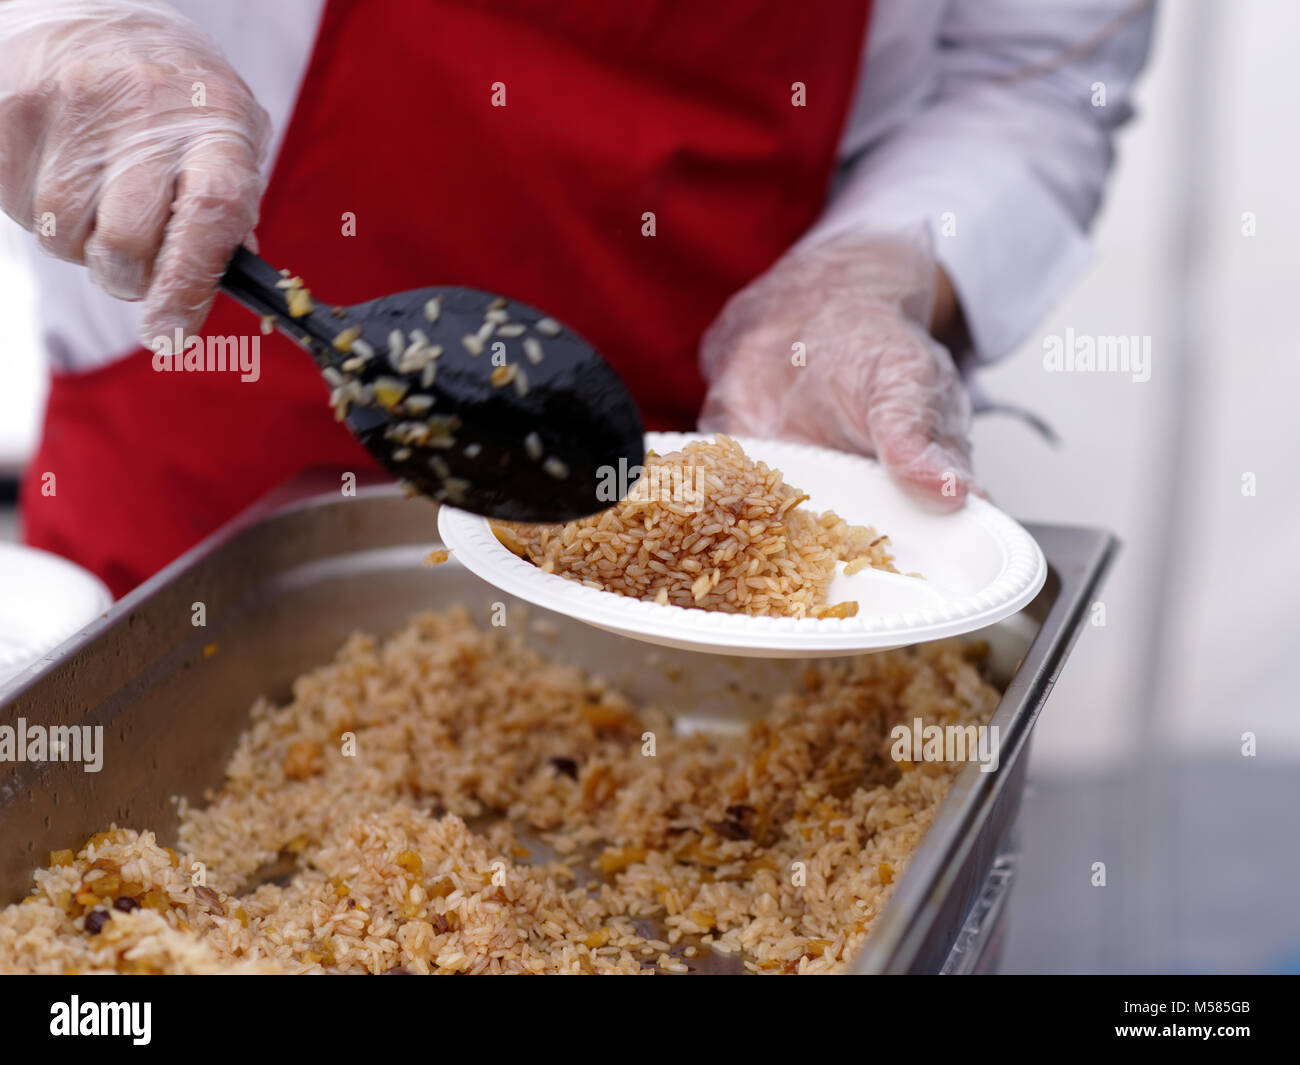 Serving pilaf outdoors during a party Stock Photo